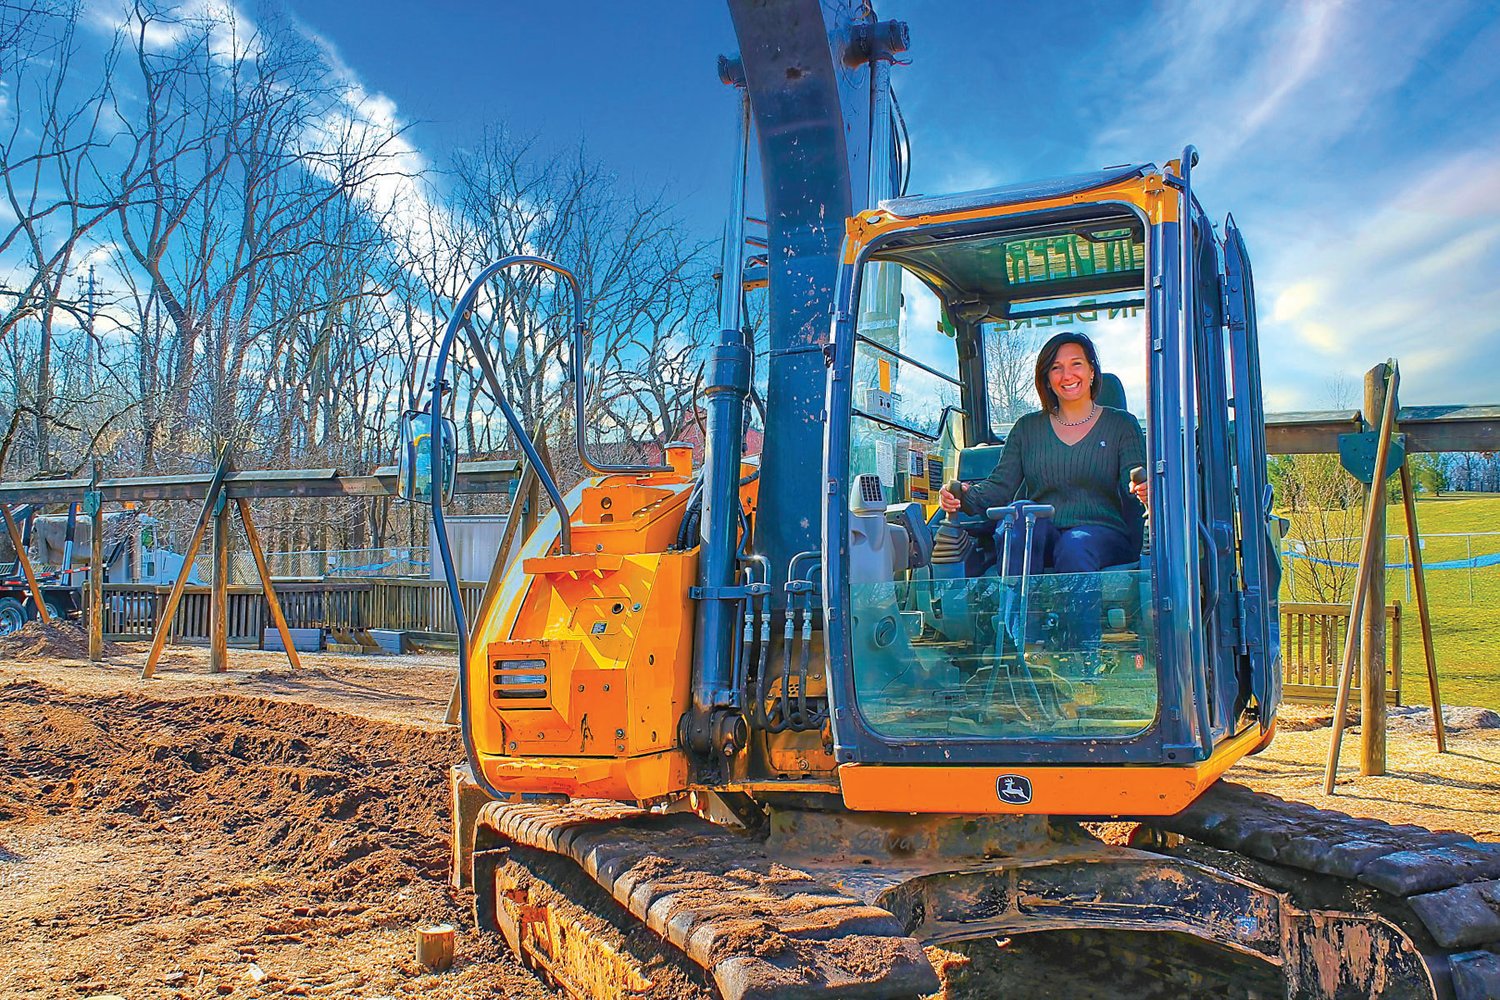 Dawn Byers posed in a bulldozer in 2013, as renovations at Kids Castle in Doylestown Township’s Central Park got underway.